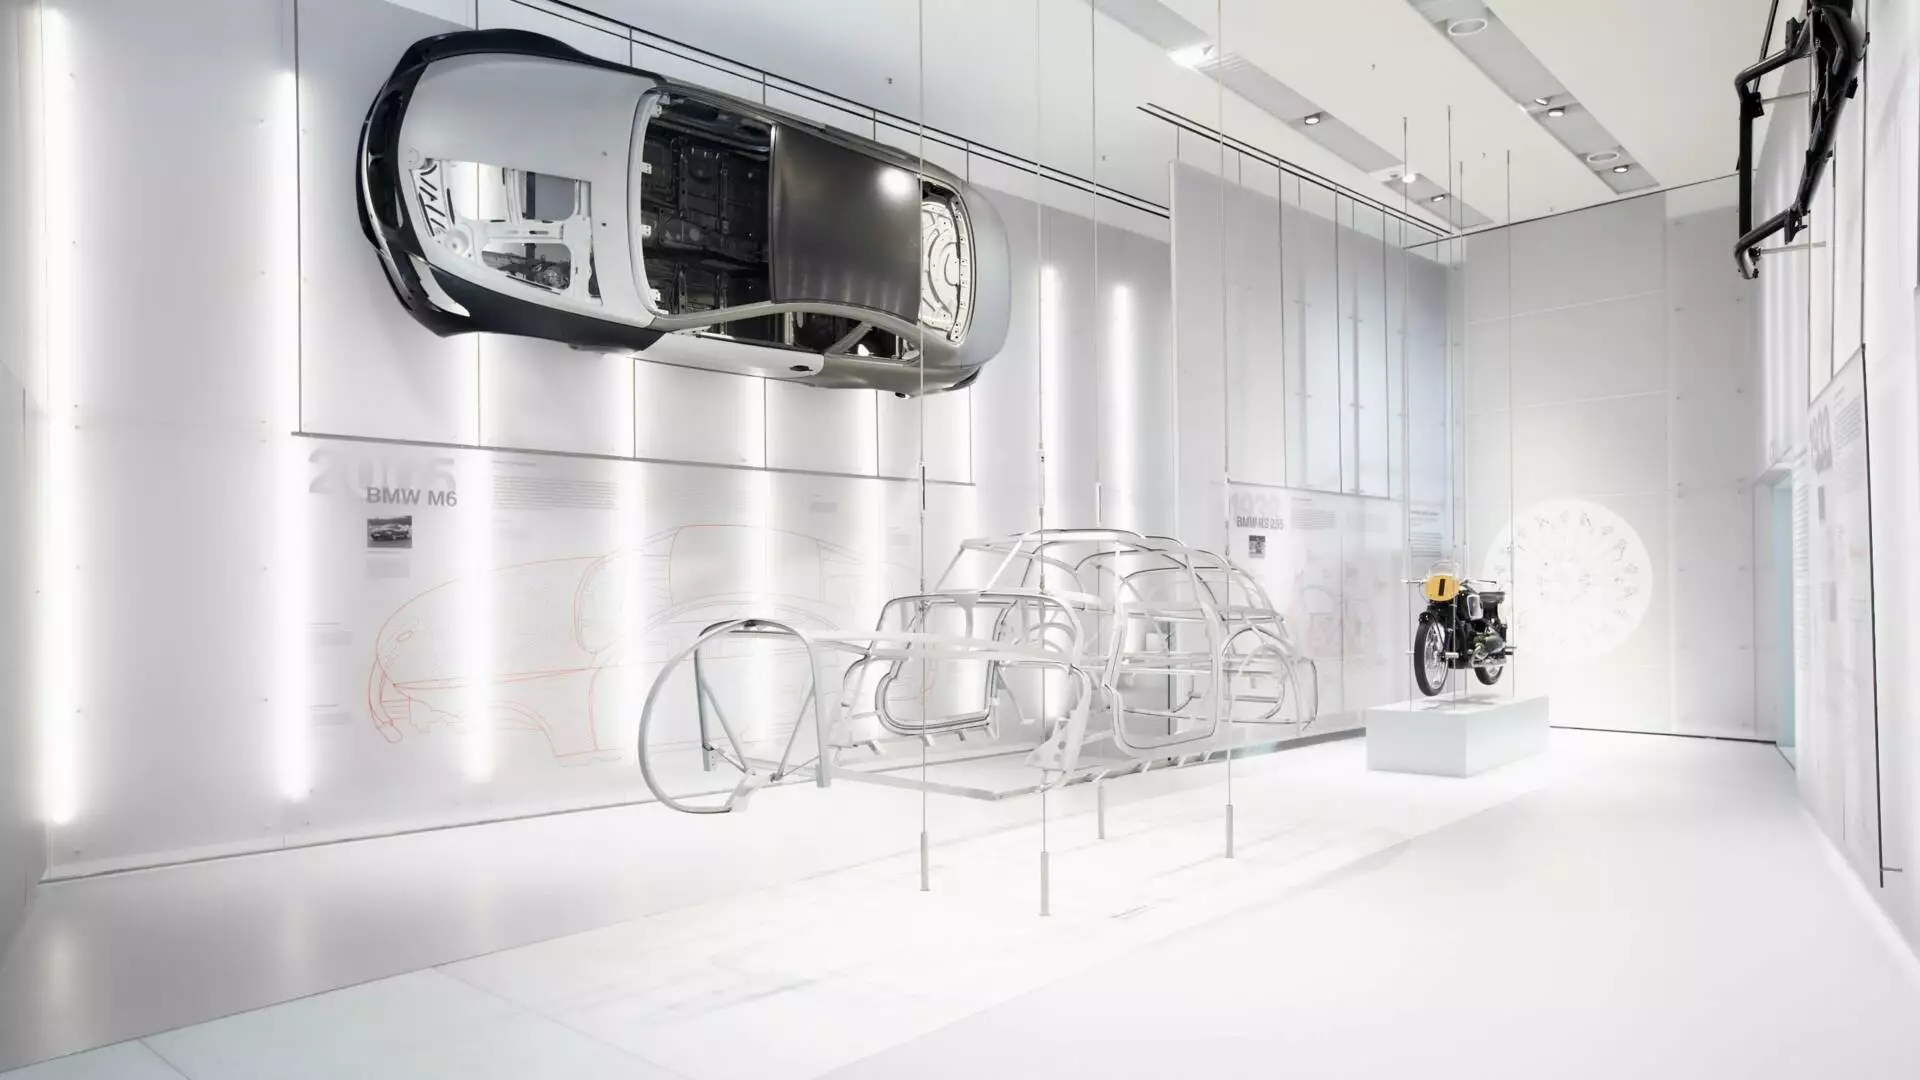 Bmw Museum On Munich In Germany